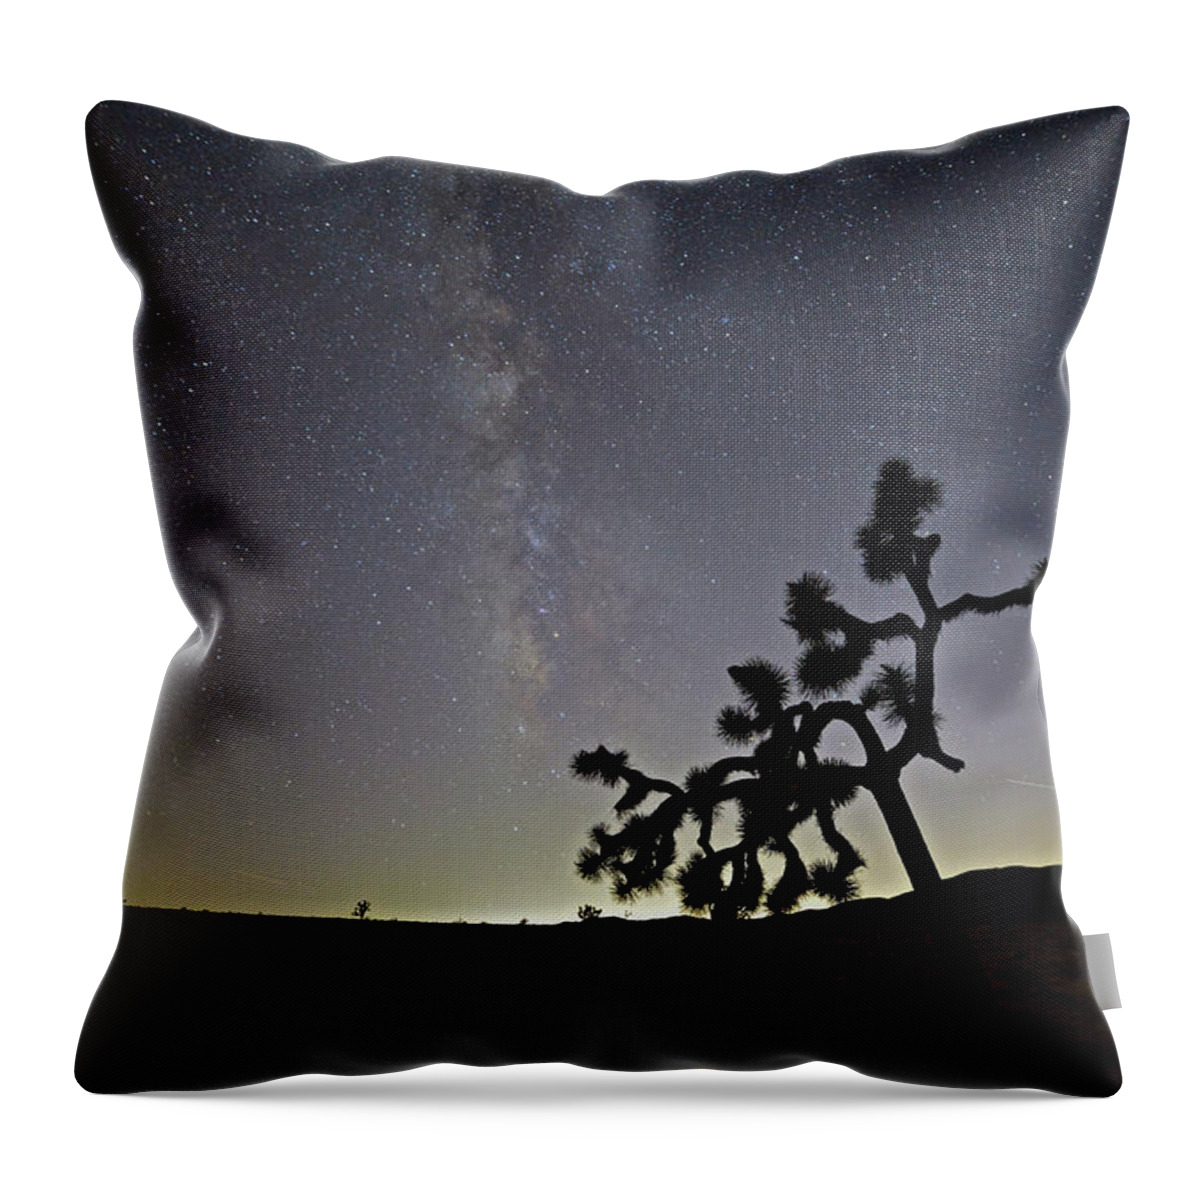 Joshua Tree National Park Throw Pillow featuring the photograph The Small of It All by Don Mercer